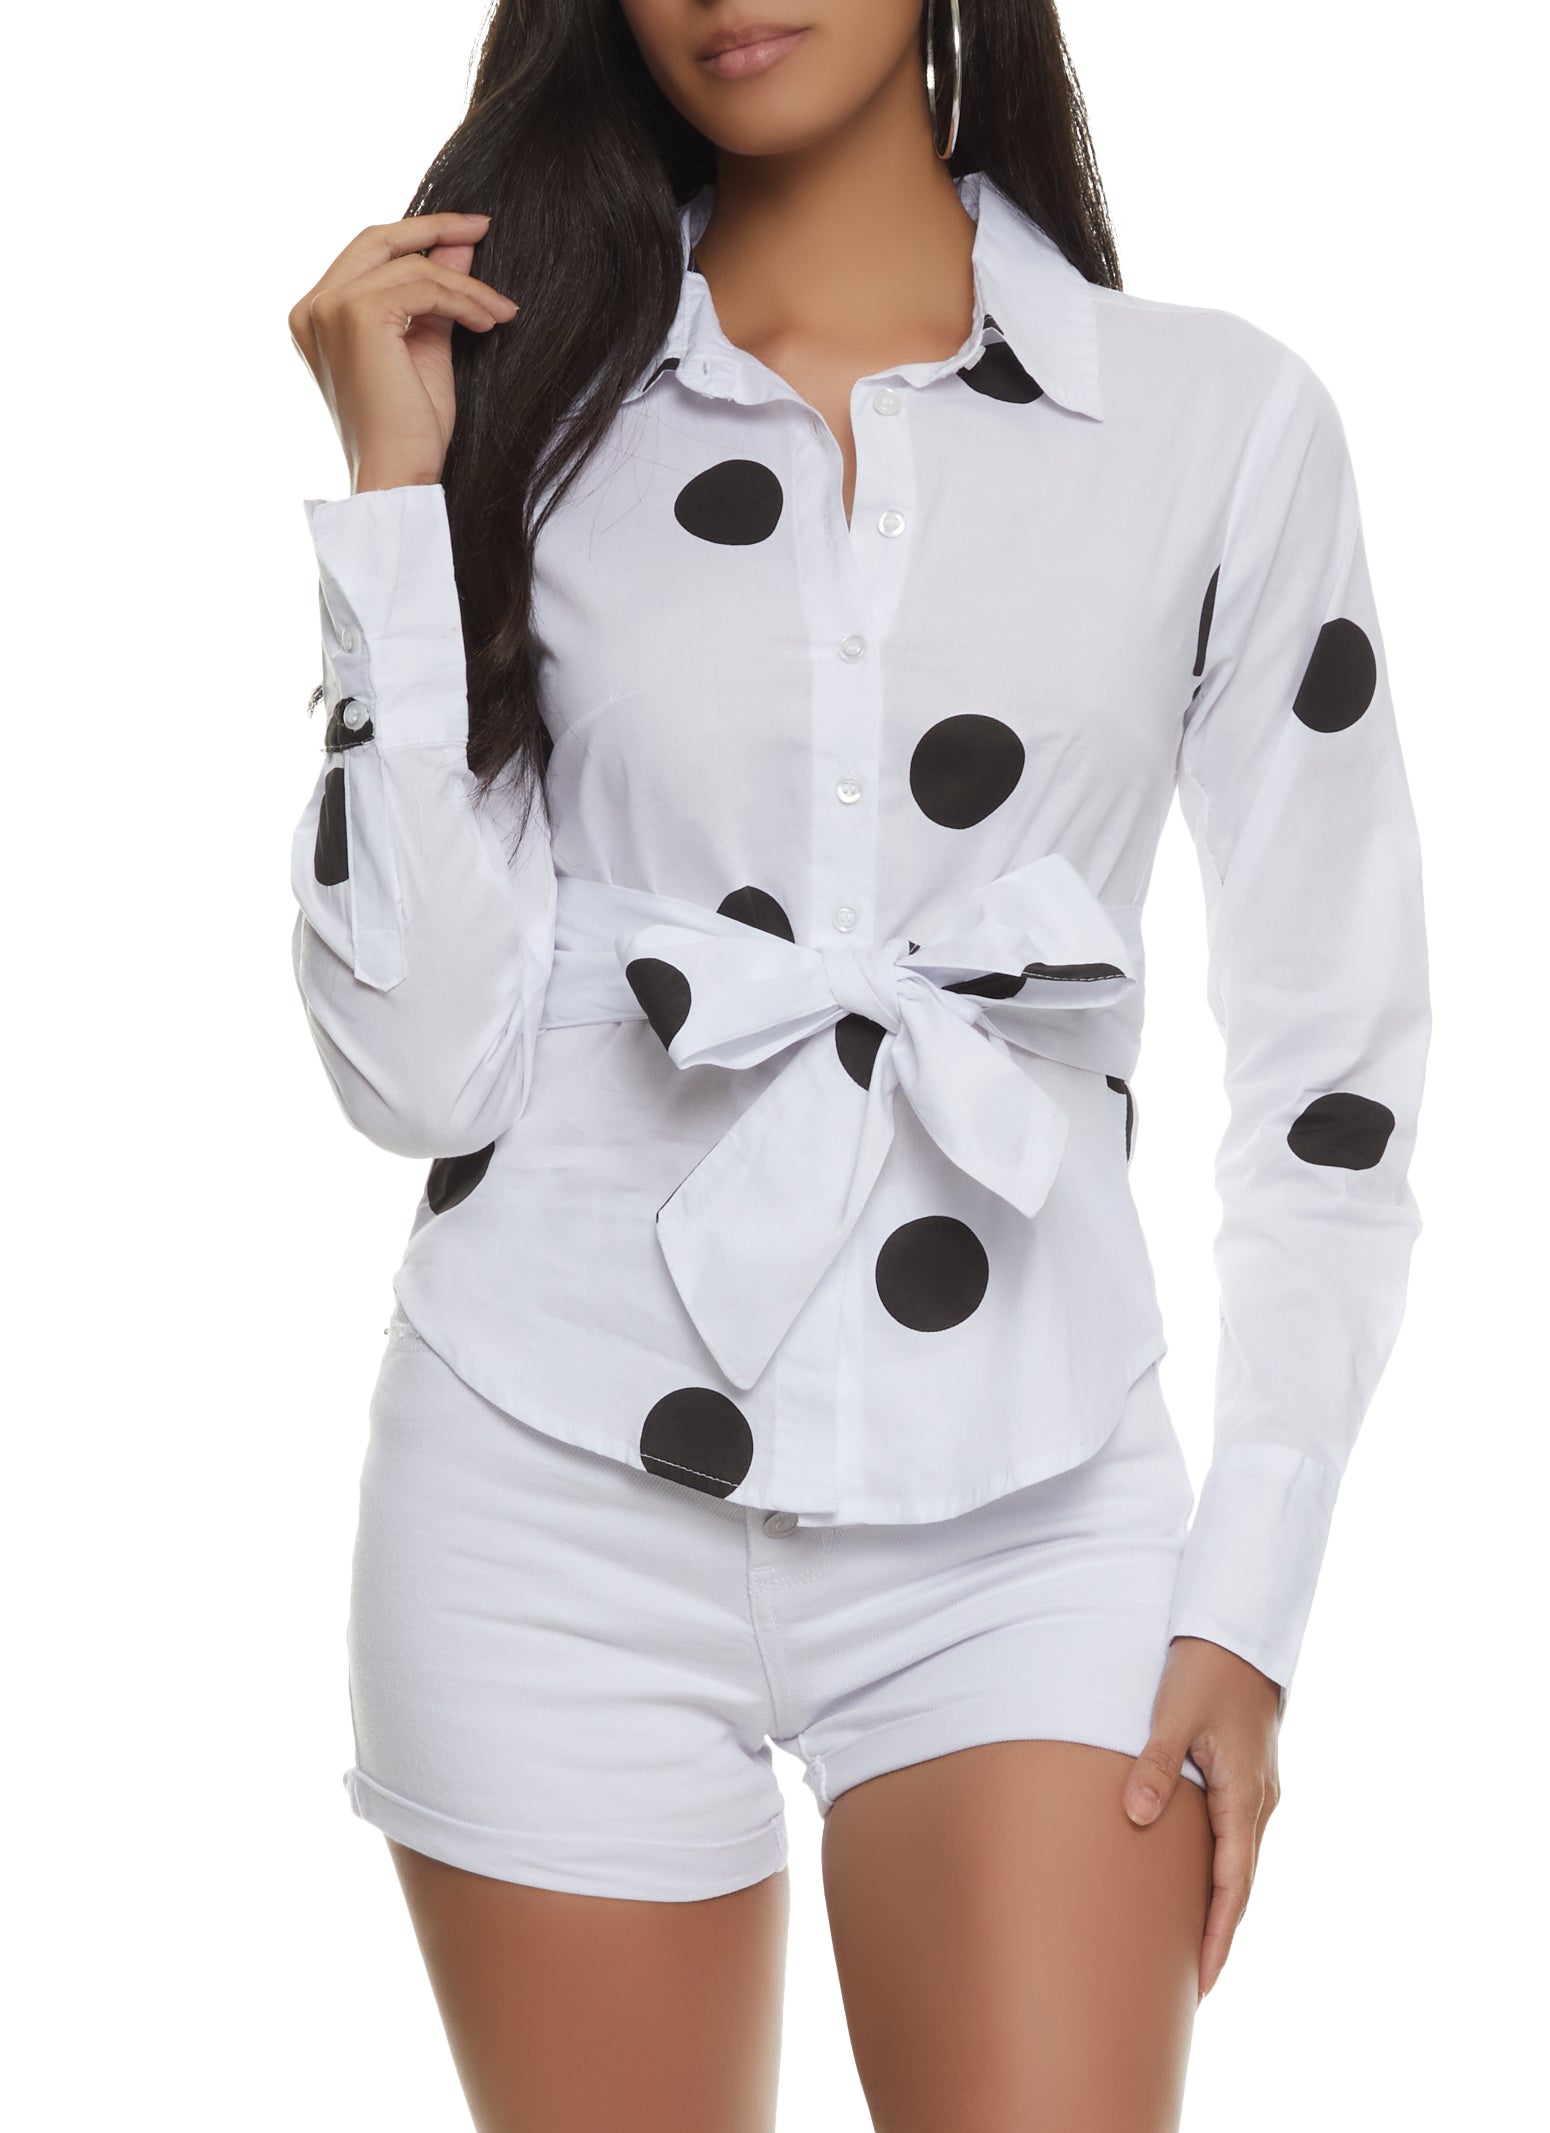 Womens Shirts and Blouses, Everyday Low Prices